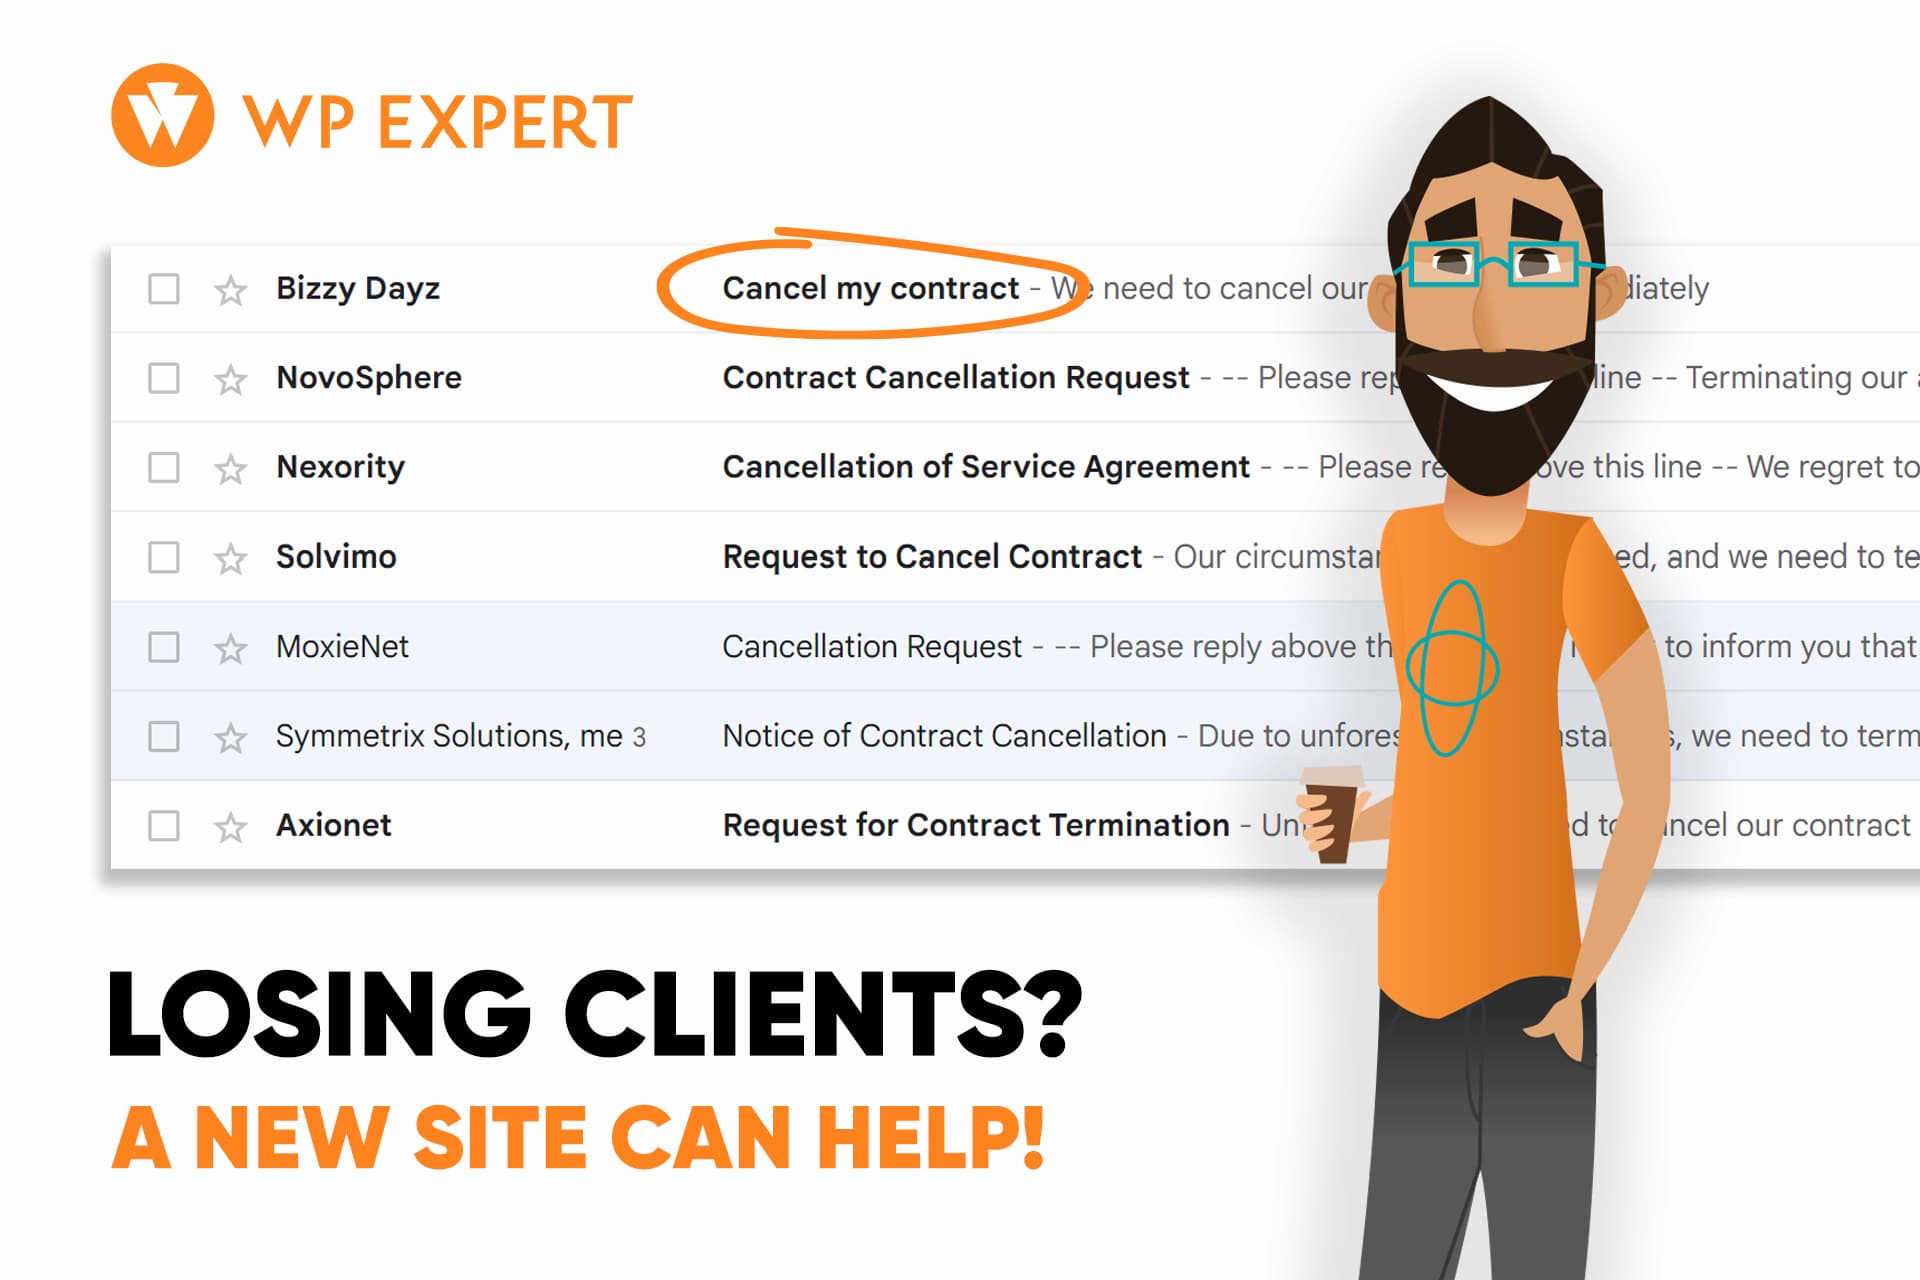 Losing clients? A new site can help!